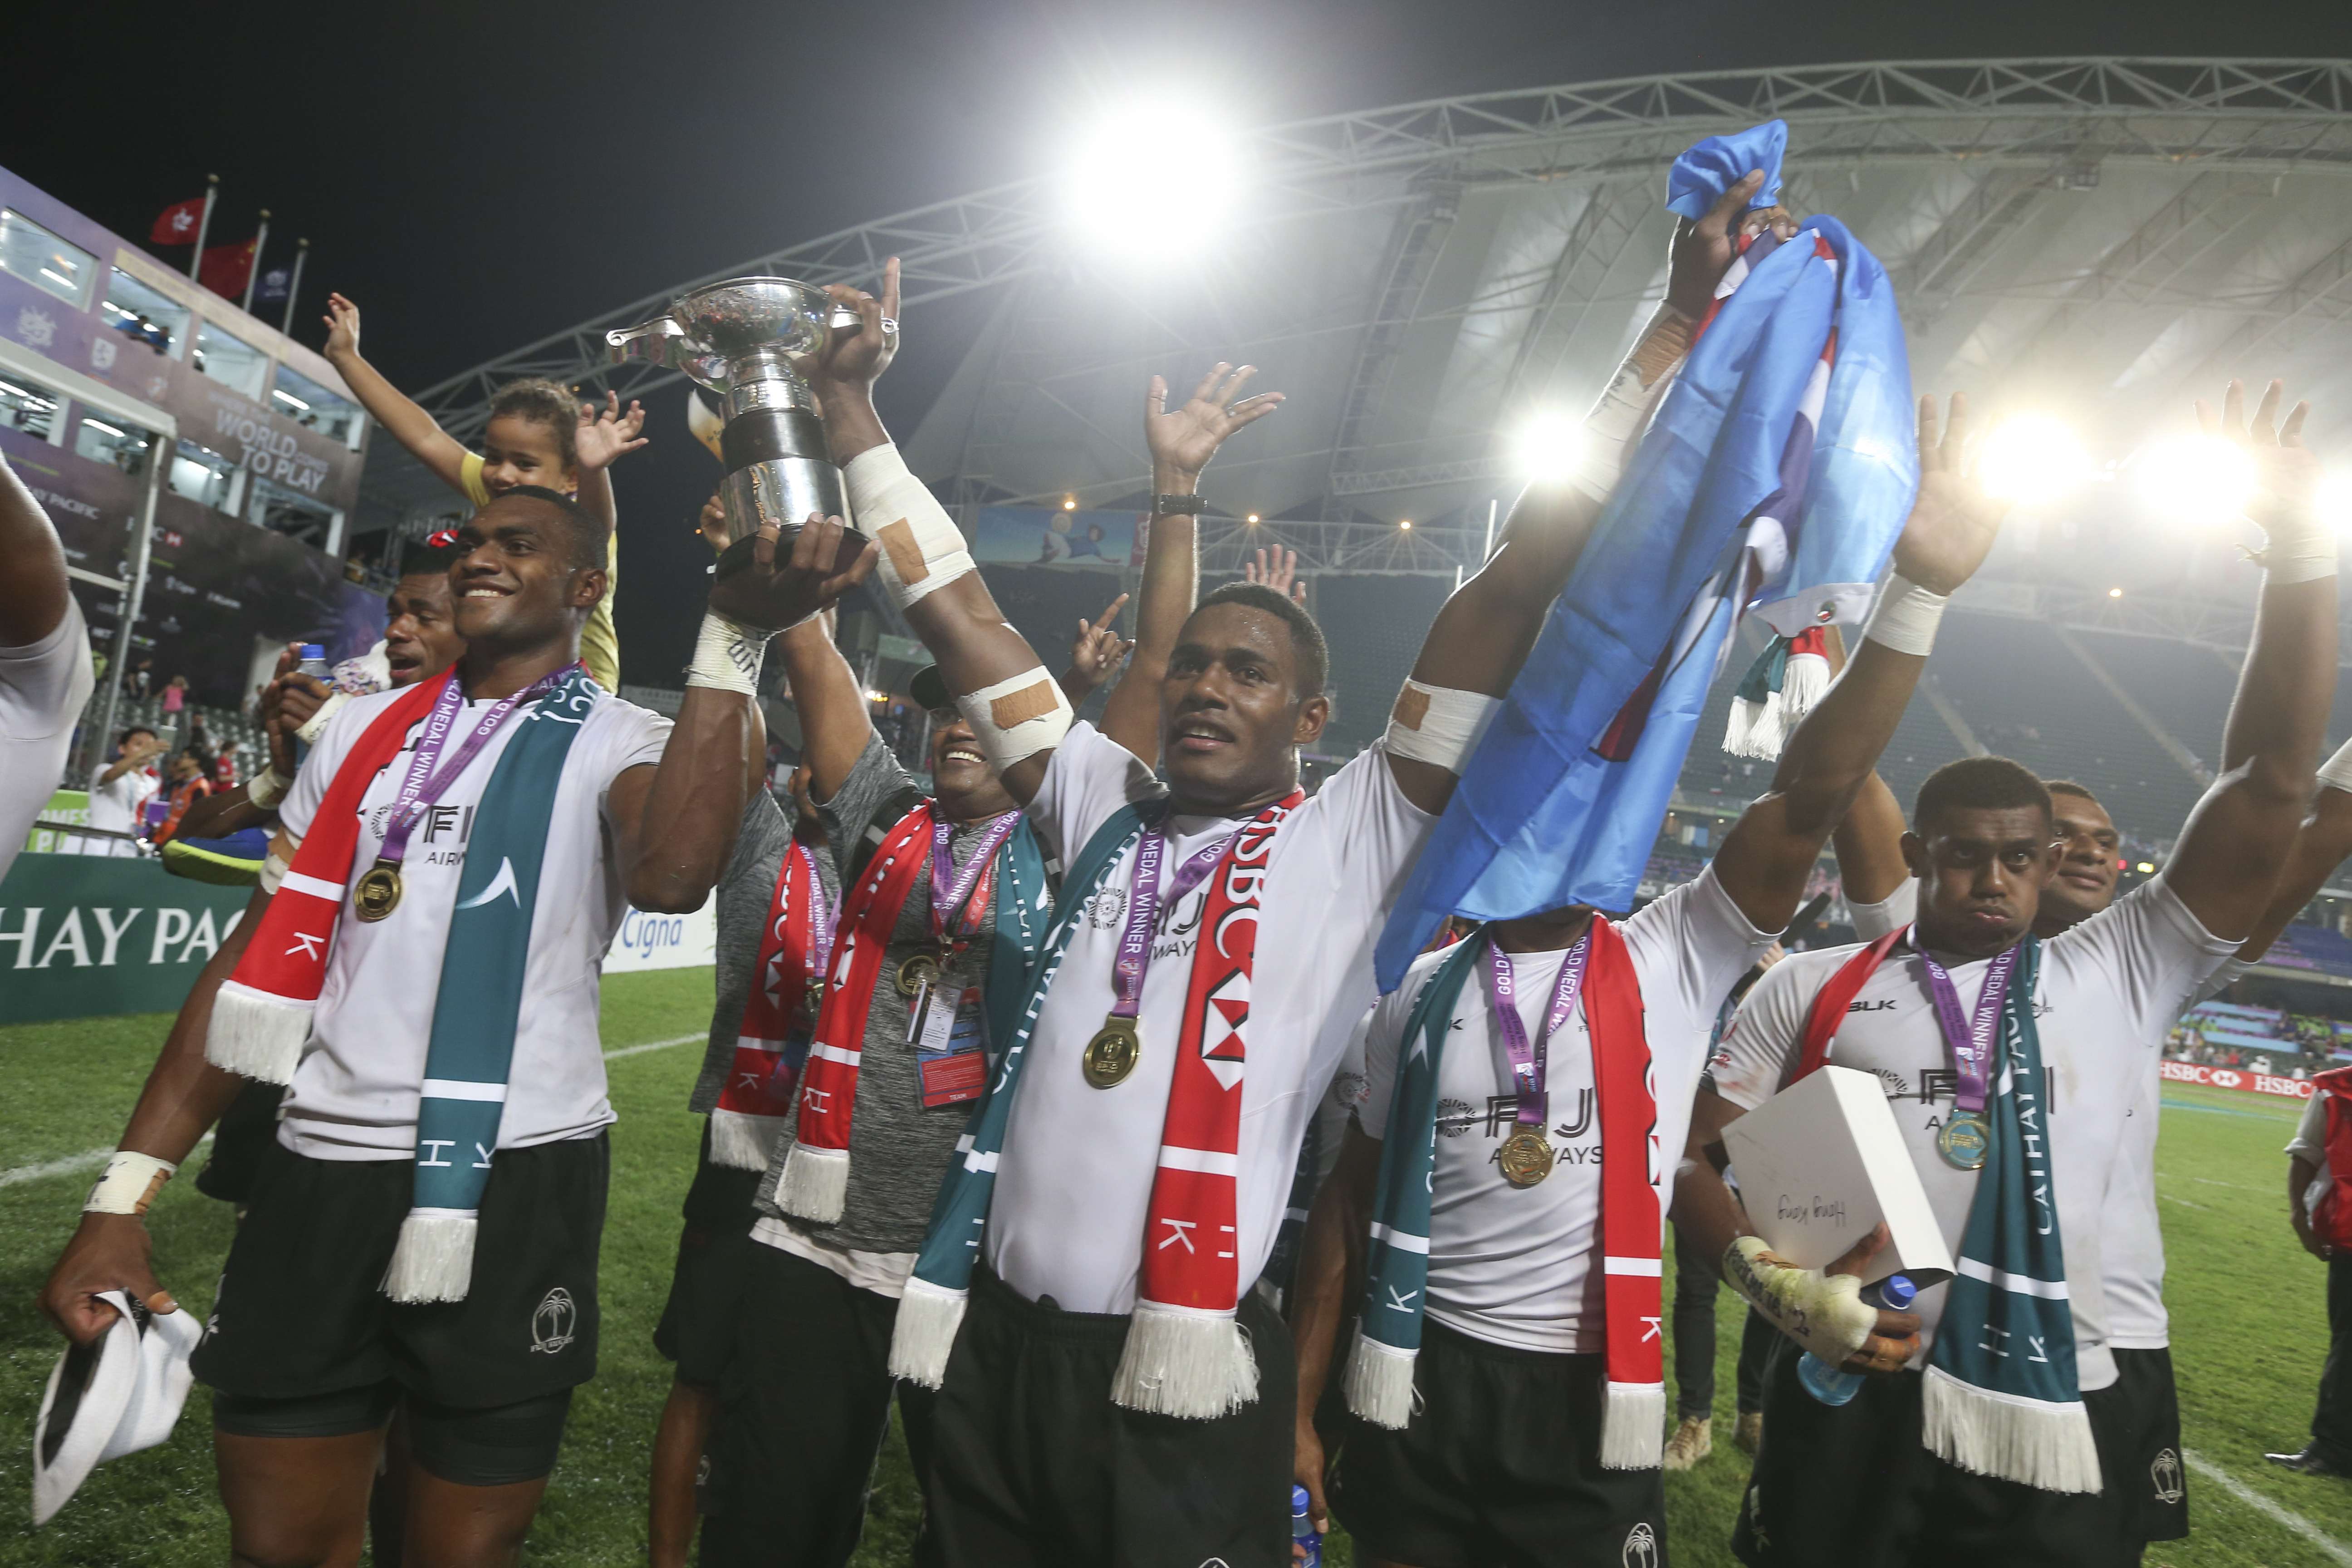 Fiji celebrate their victory against South Africa at the 2017 Hong Kong Sevens. Photo: K. Y. Cheng